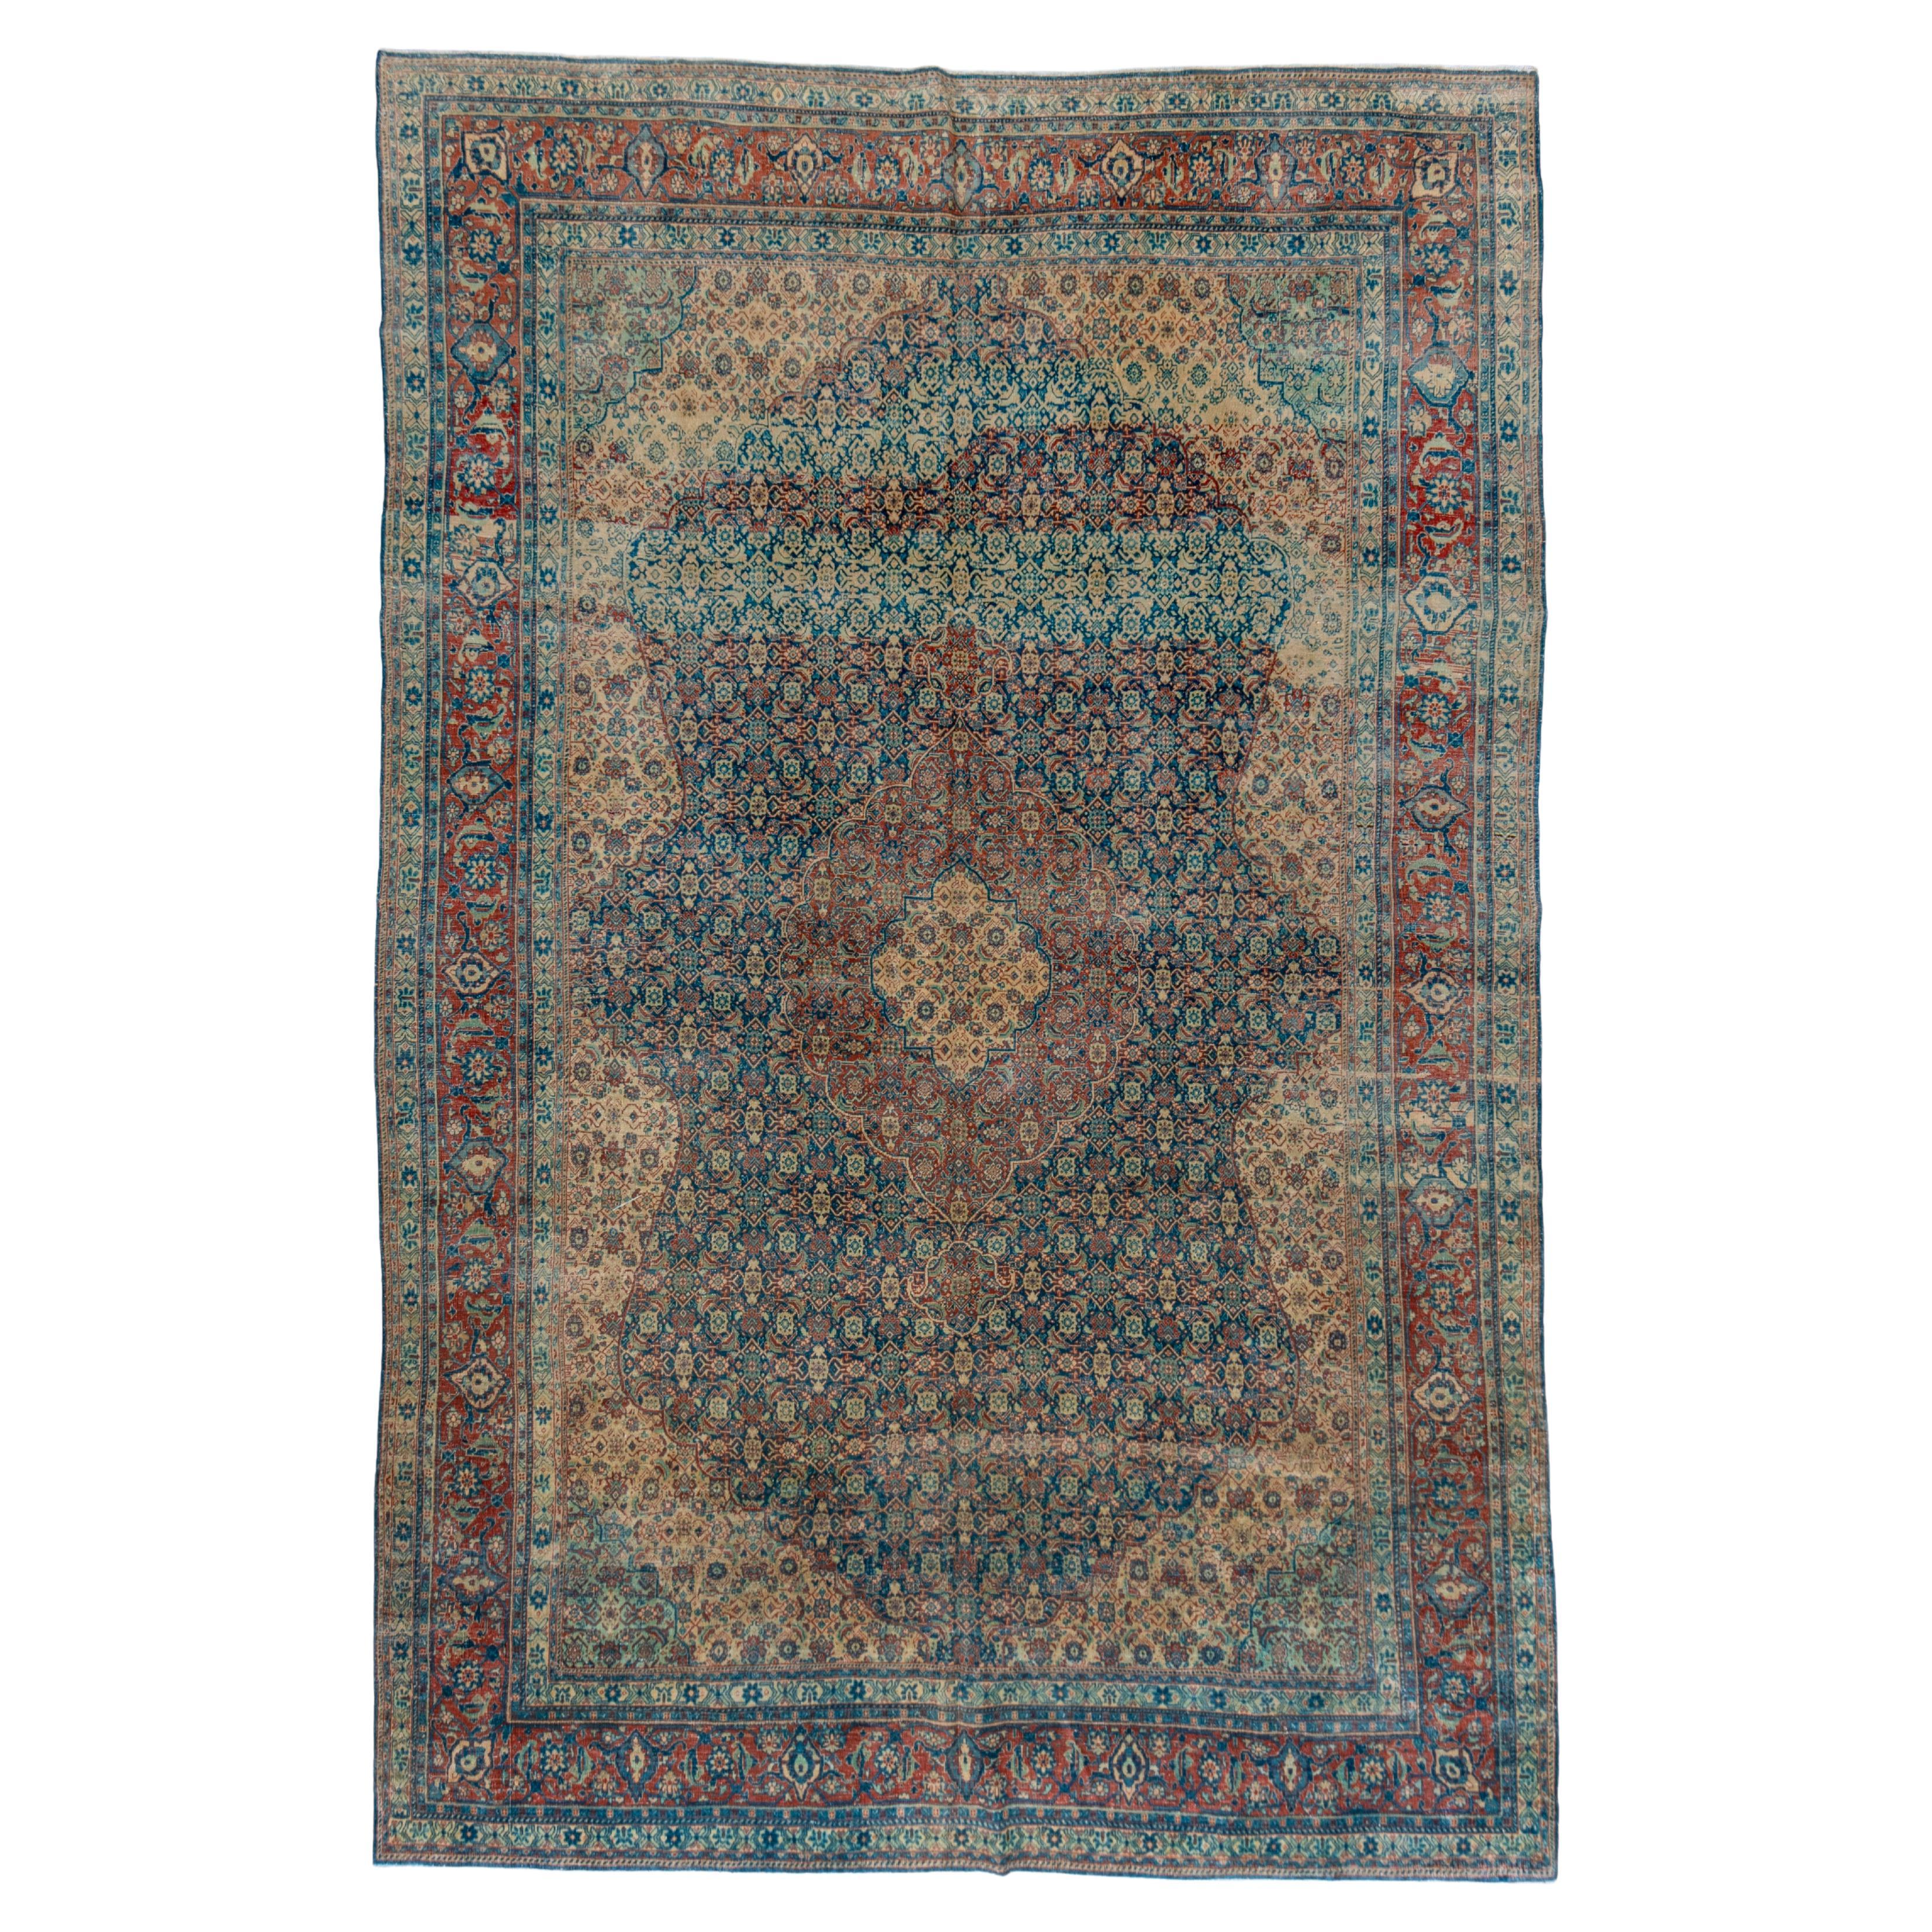 Finely Woven Antique Tabriz Rug, Blue and Red Tones